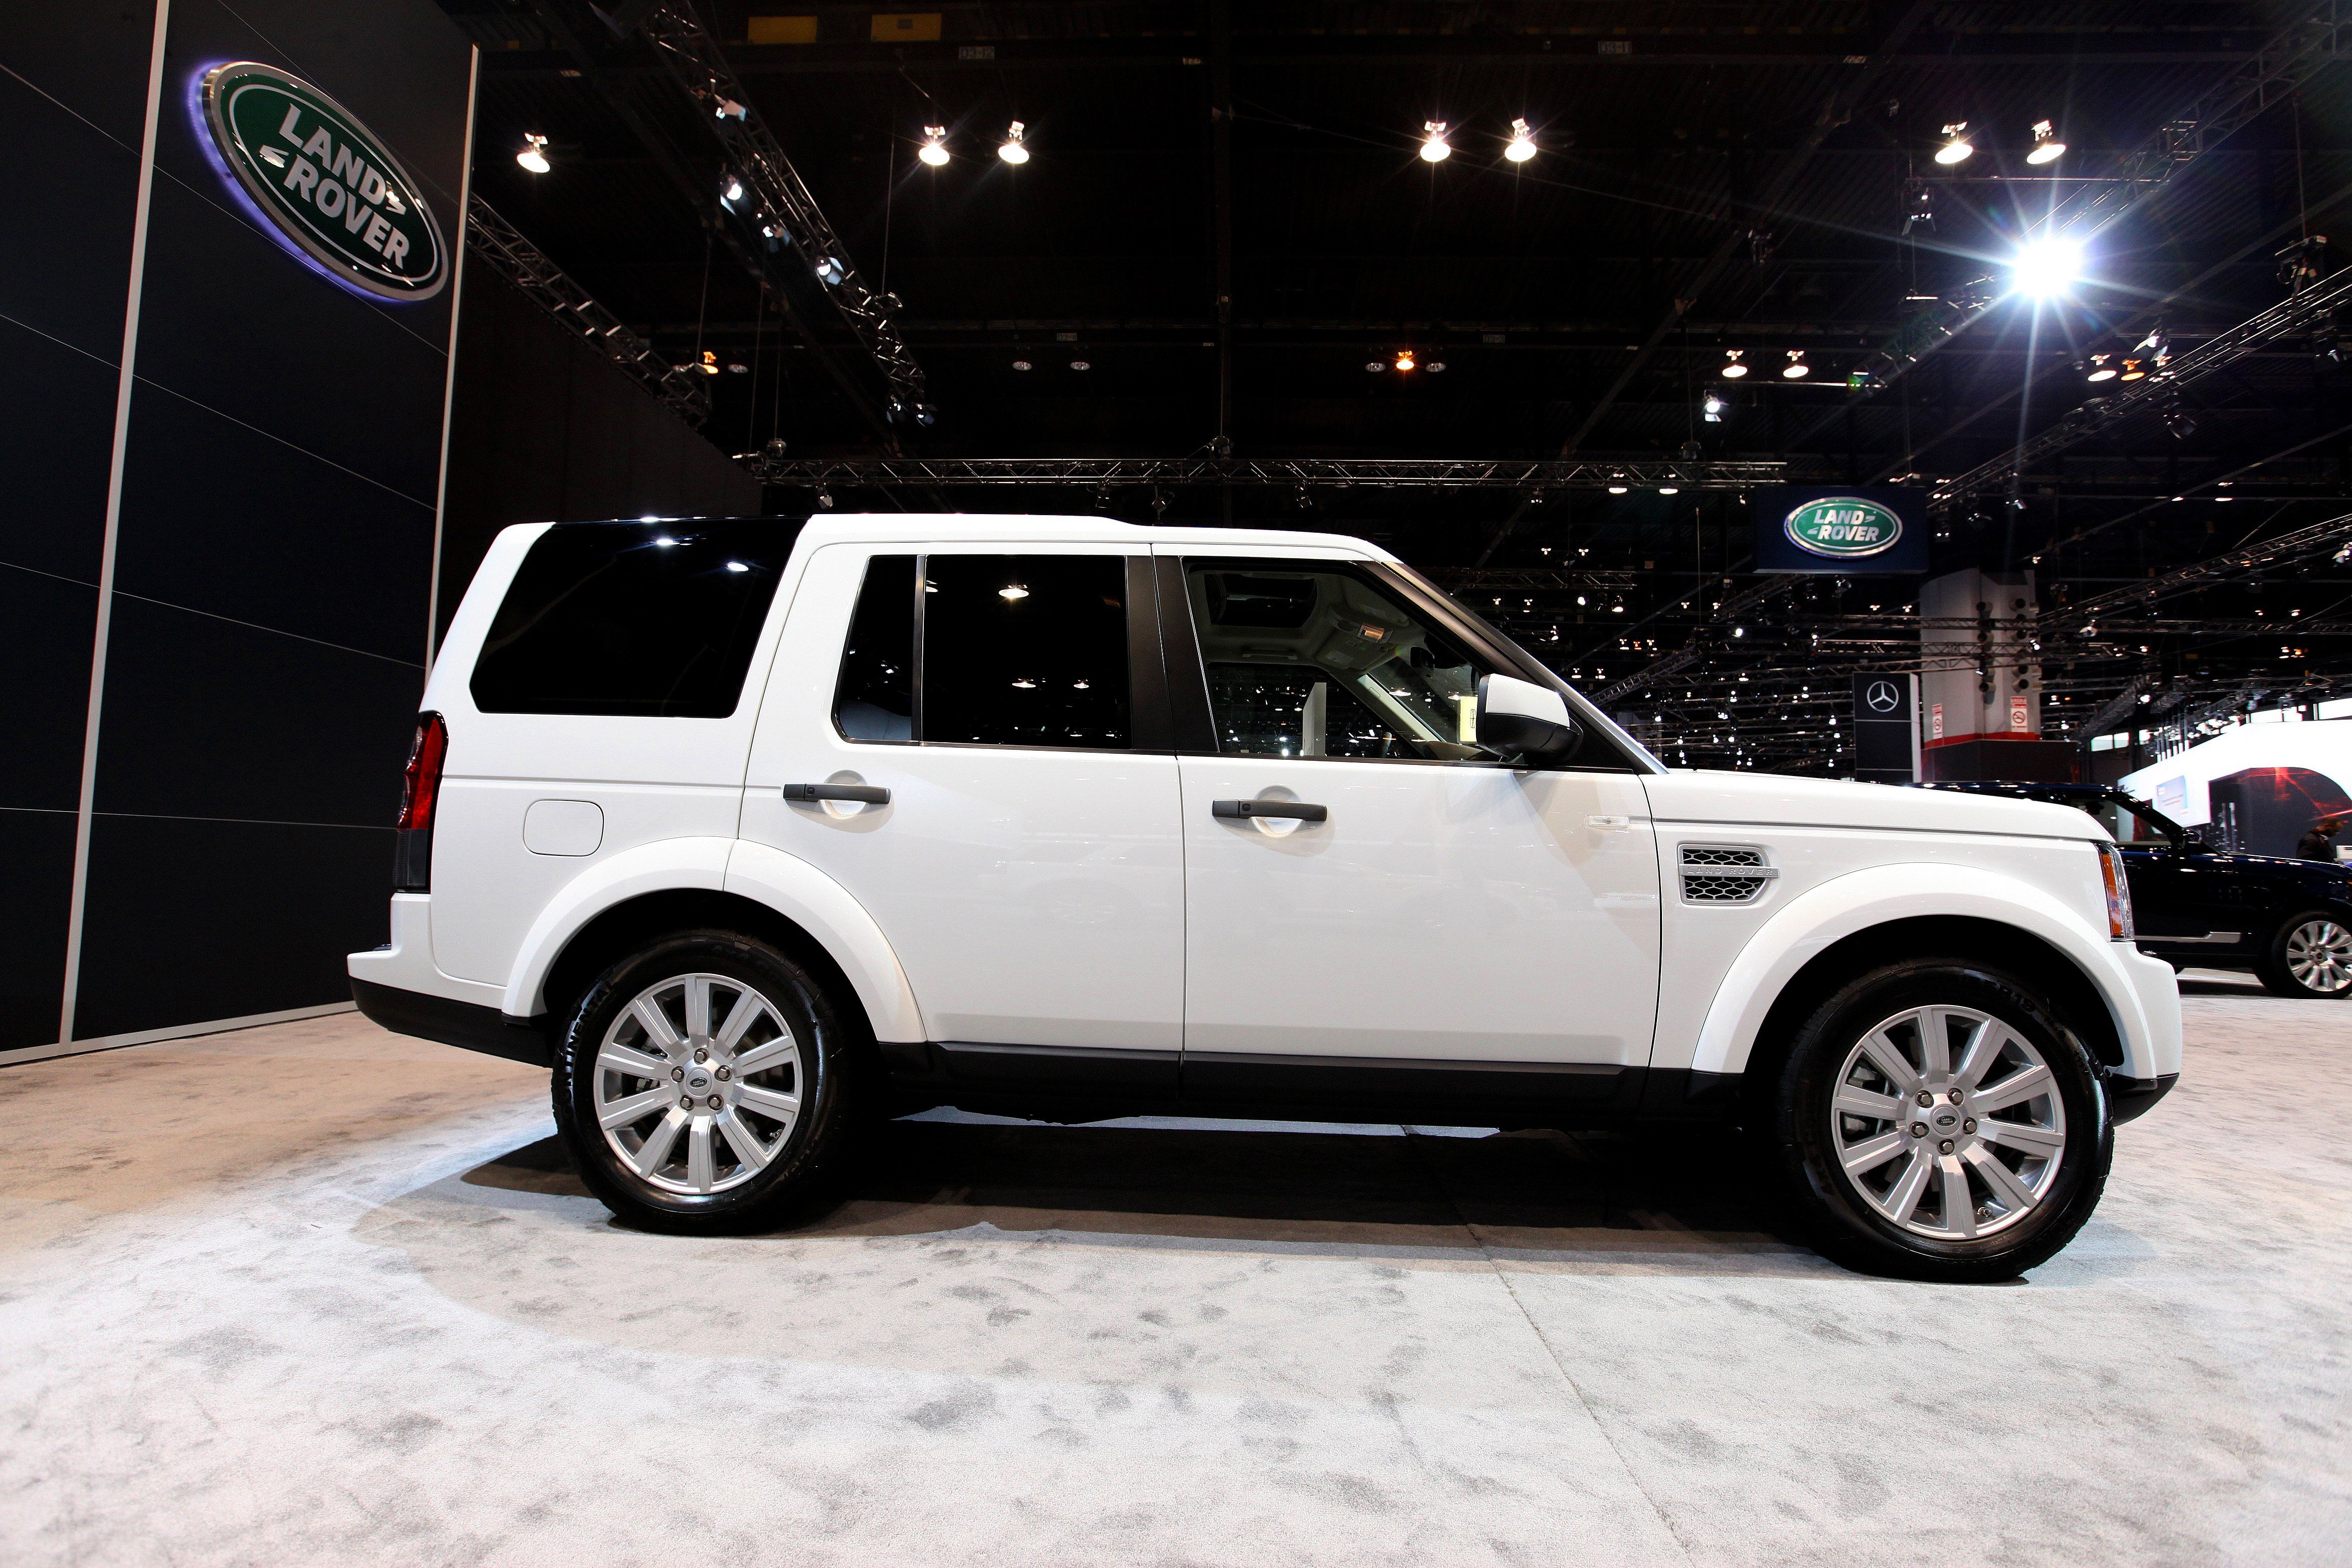 https://hips.hearstapps.com/hmg-prod/images/land-rover-lr4-at-the-105th-annual-chicago-auto-show-at-news-photo-1637268655.jpg